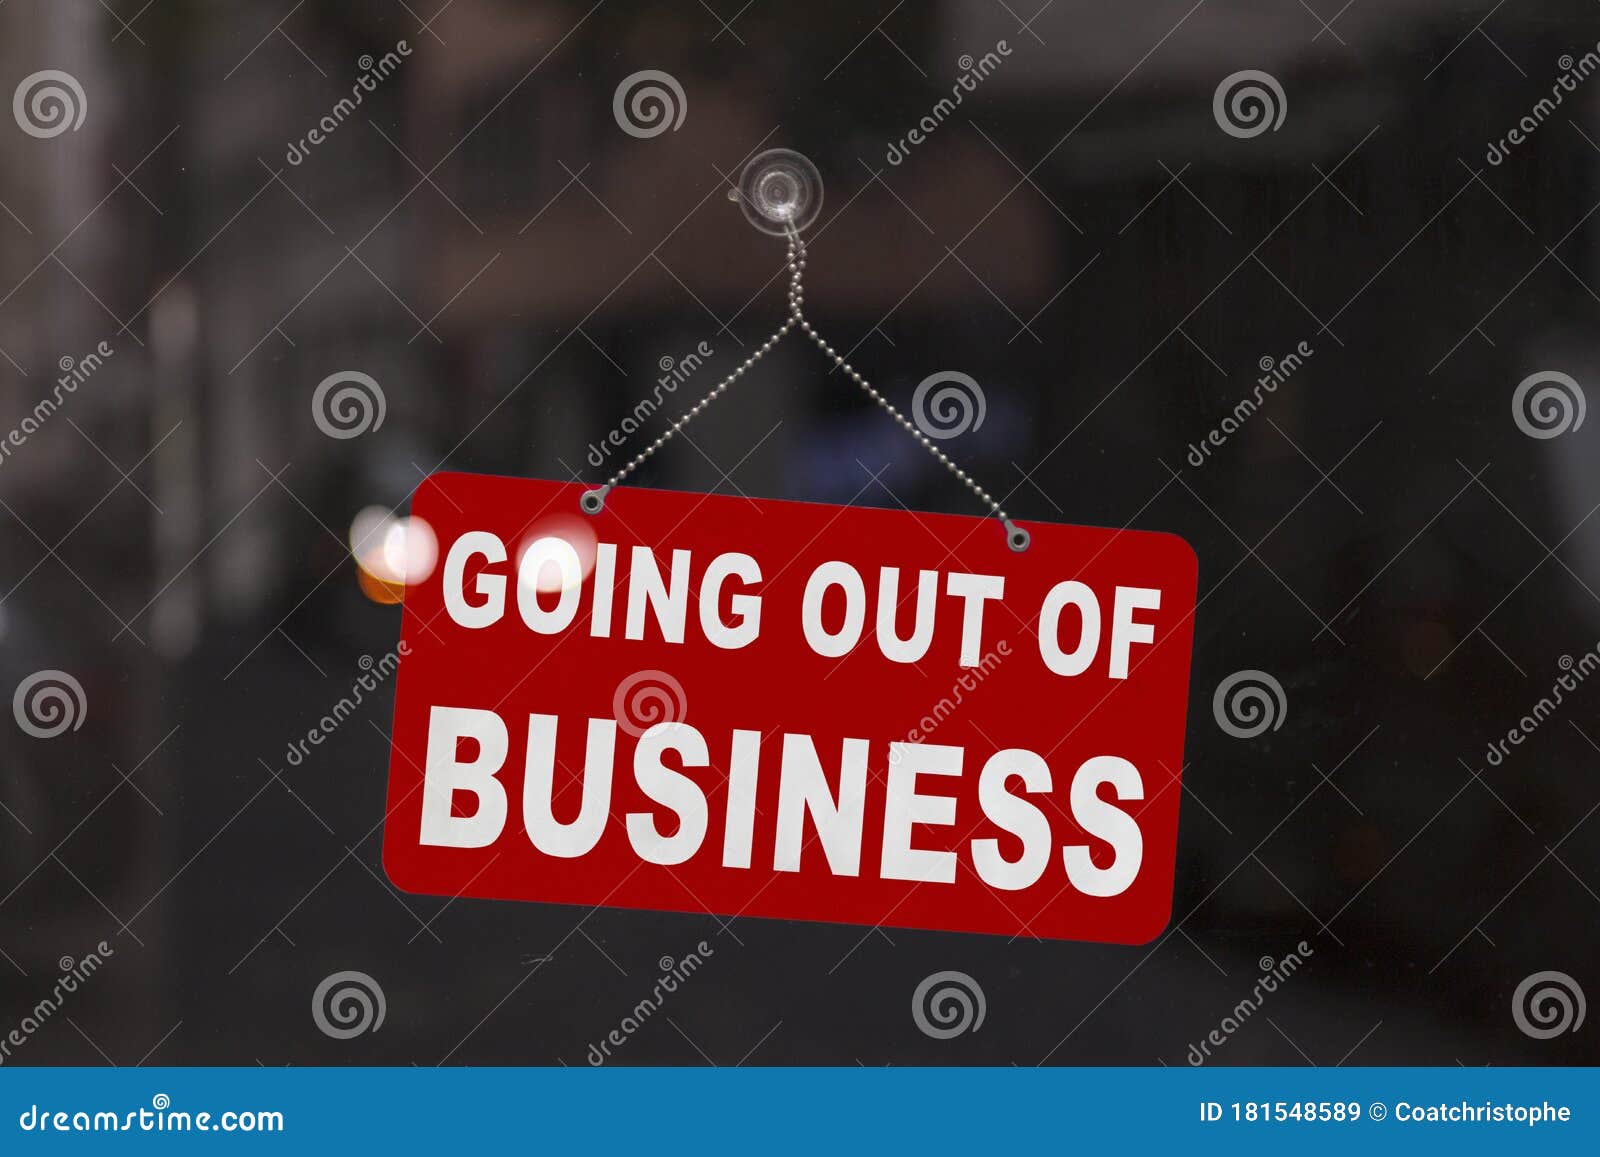 going out of business - closed sign